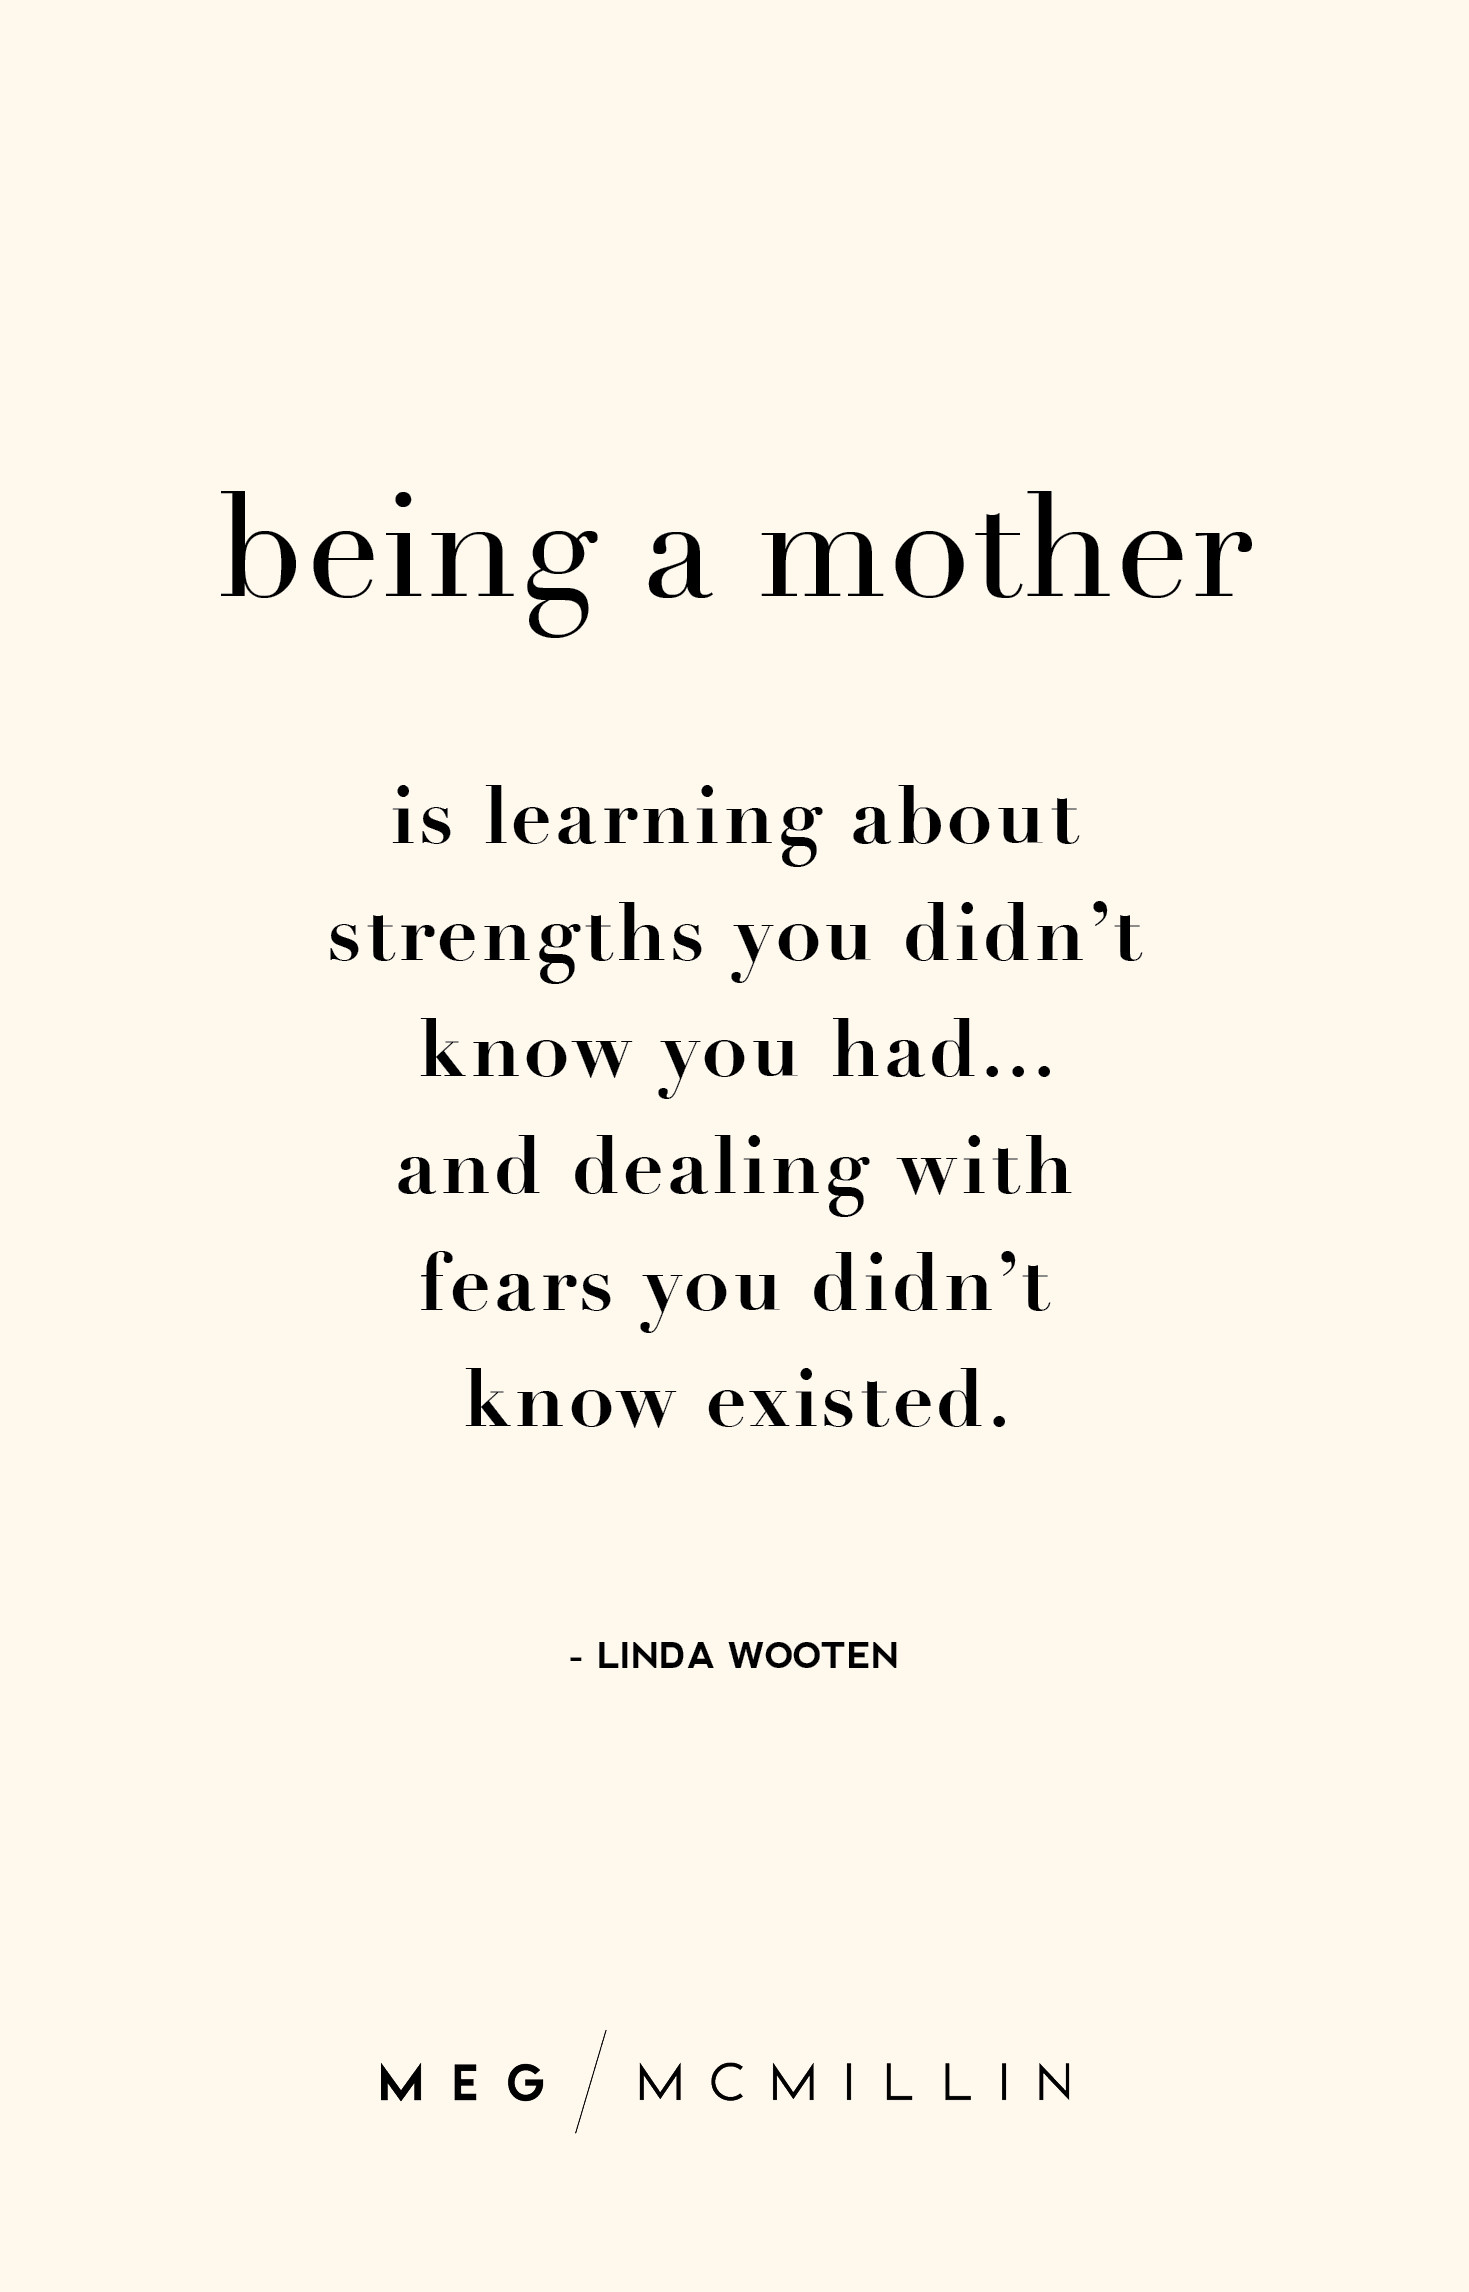 Being A Mother Quotes
 10 inspiring mom quotes to you through a tough day